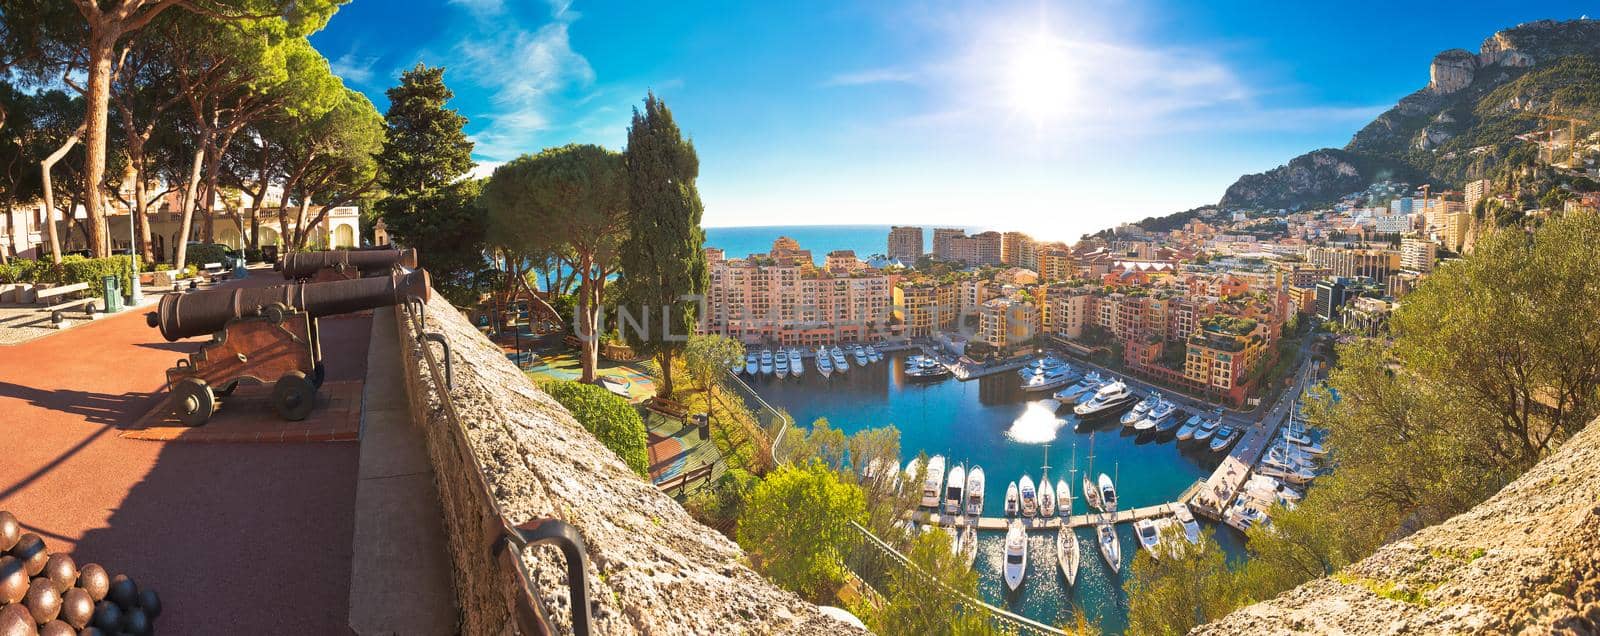 Monaco. Fontvieille colorful harbor and waterfront aerial panoramic view from upper old town by xbrchx